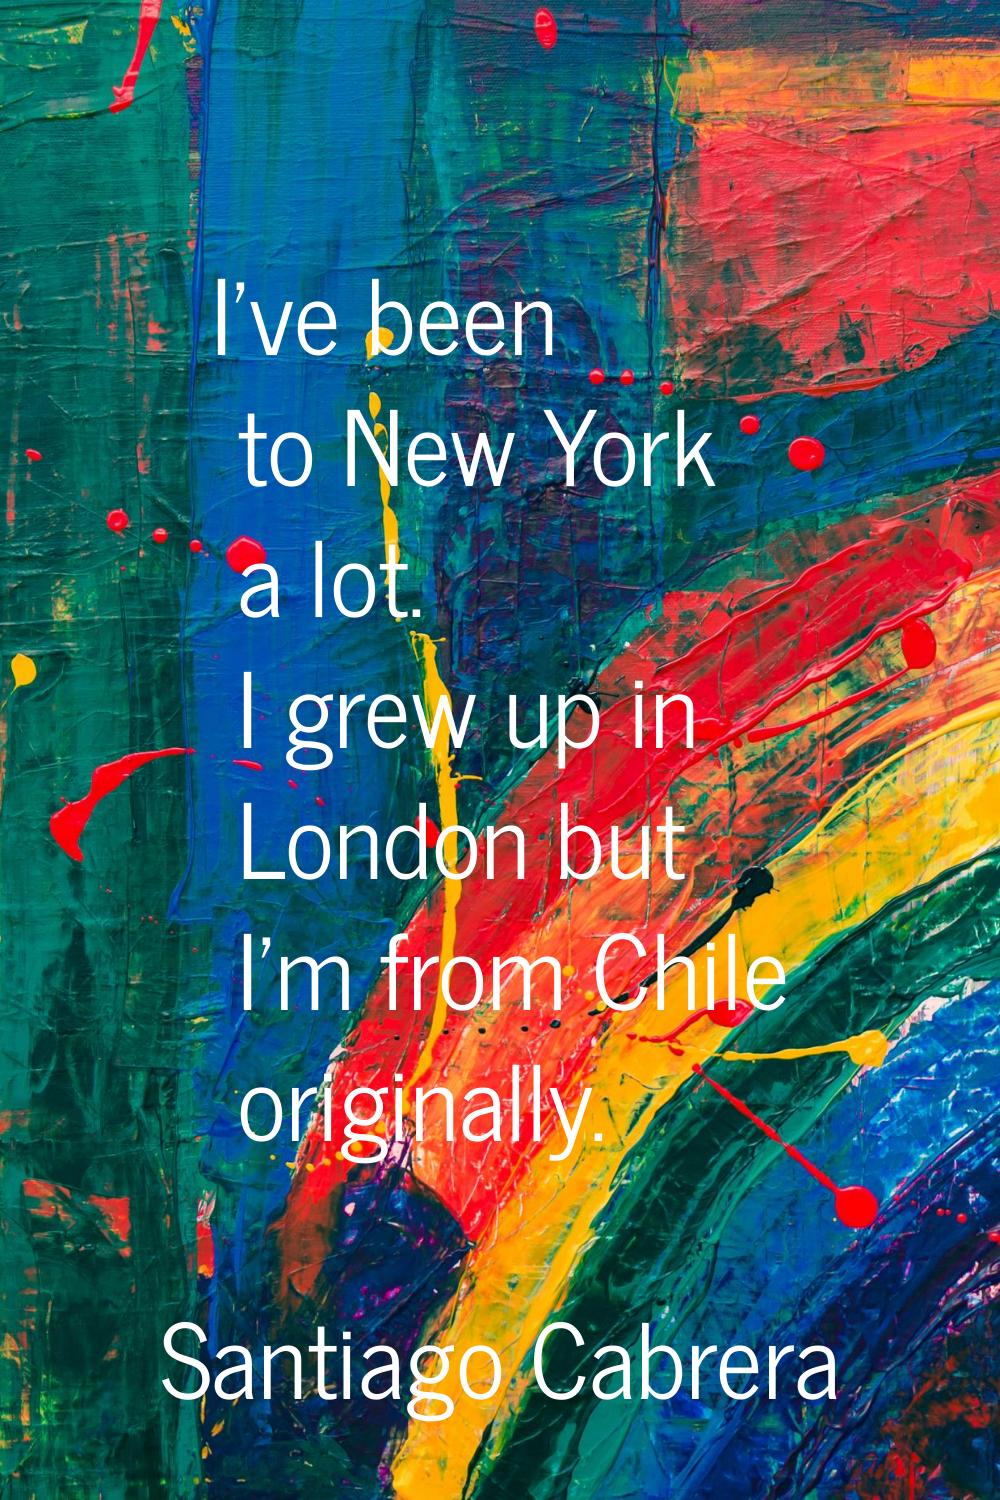 I've been to New York a lot. I grew up in London but I'm from Chile originally.